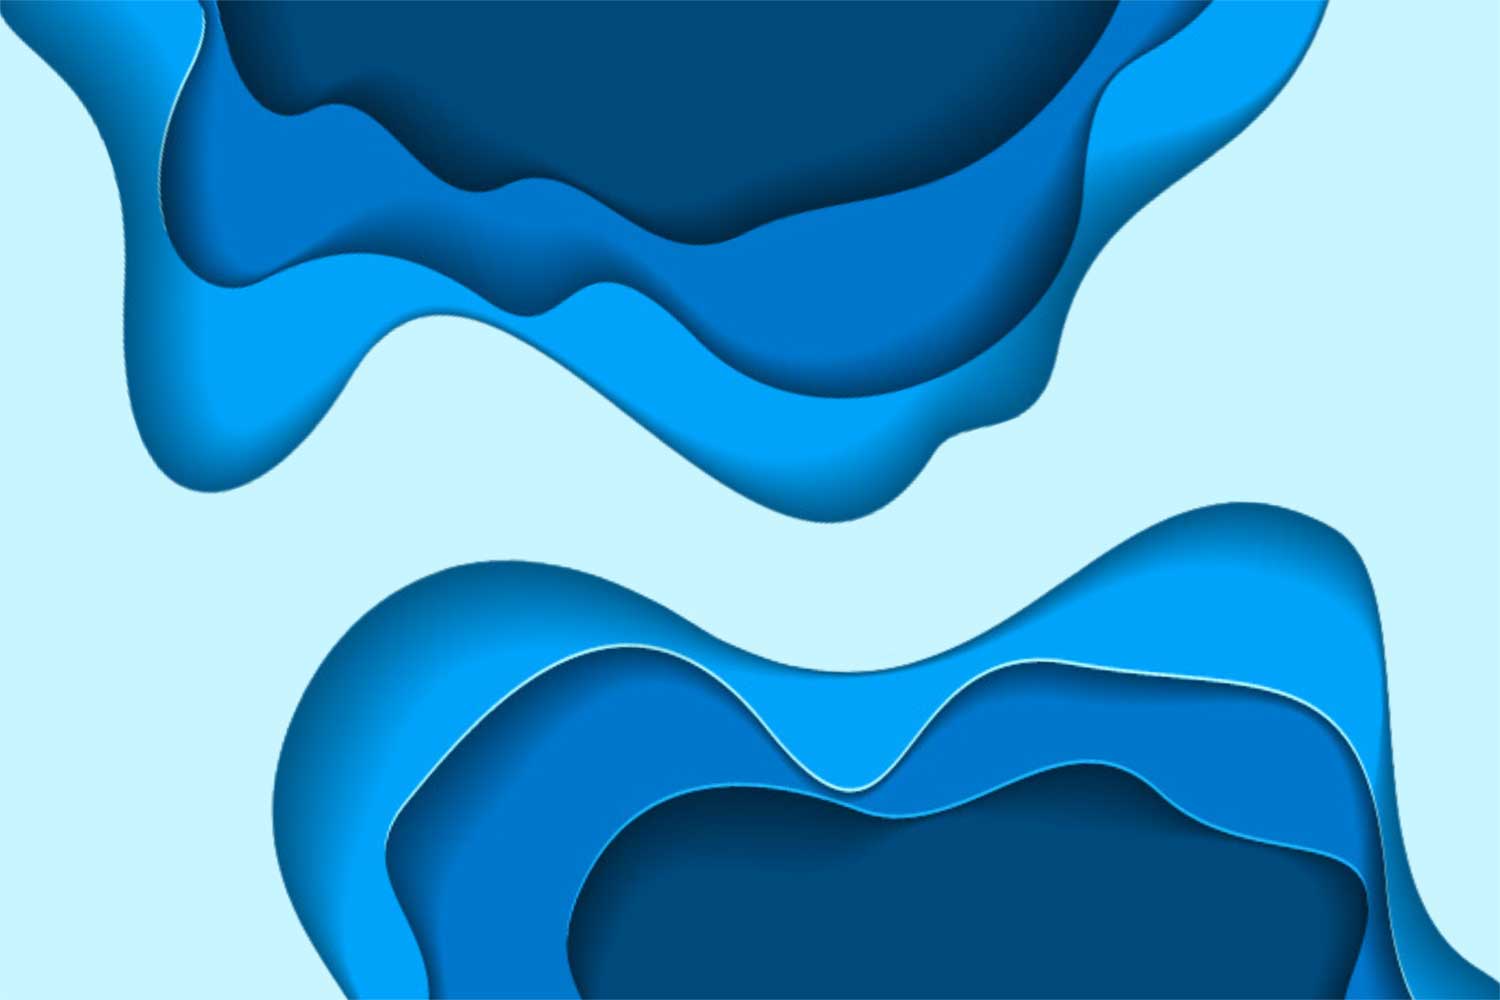 An abstract illustration of rivers converging. Swaths of blue, undulating shapes meet and overlap.